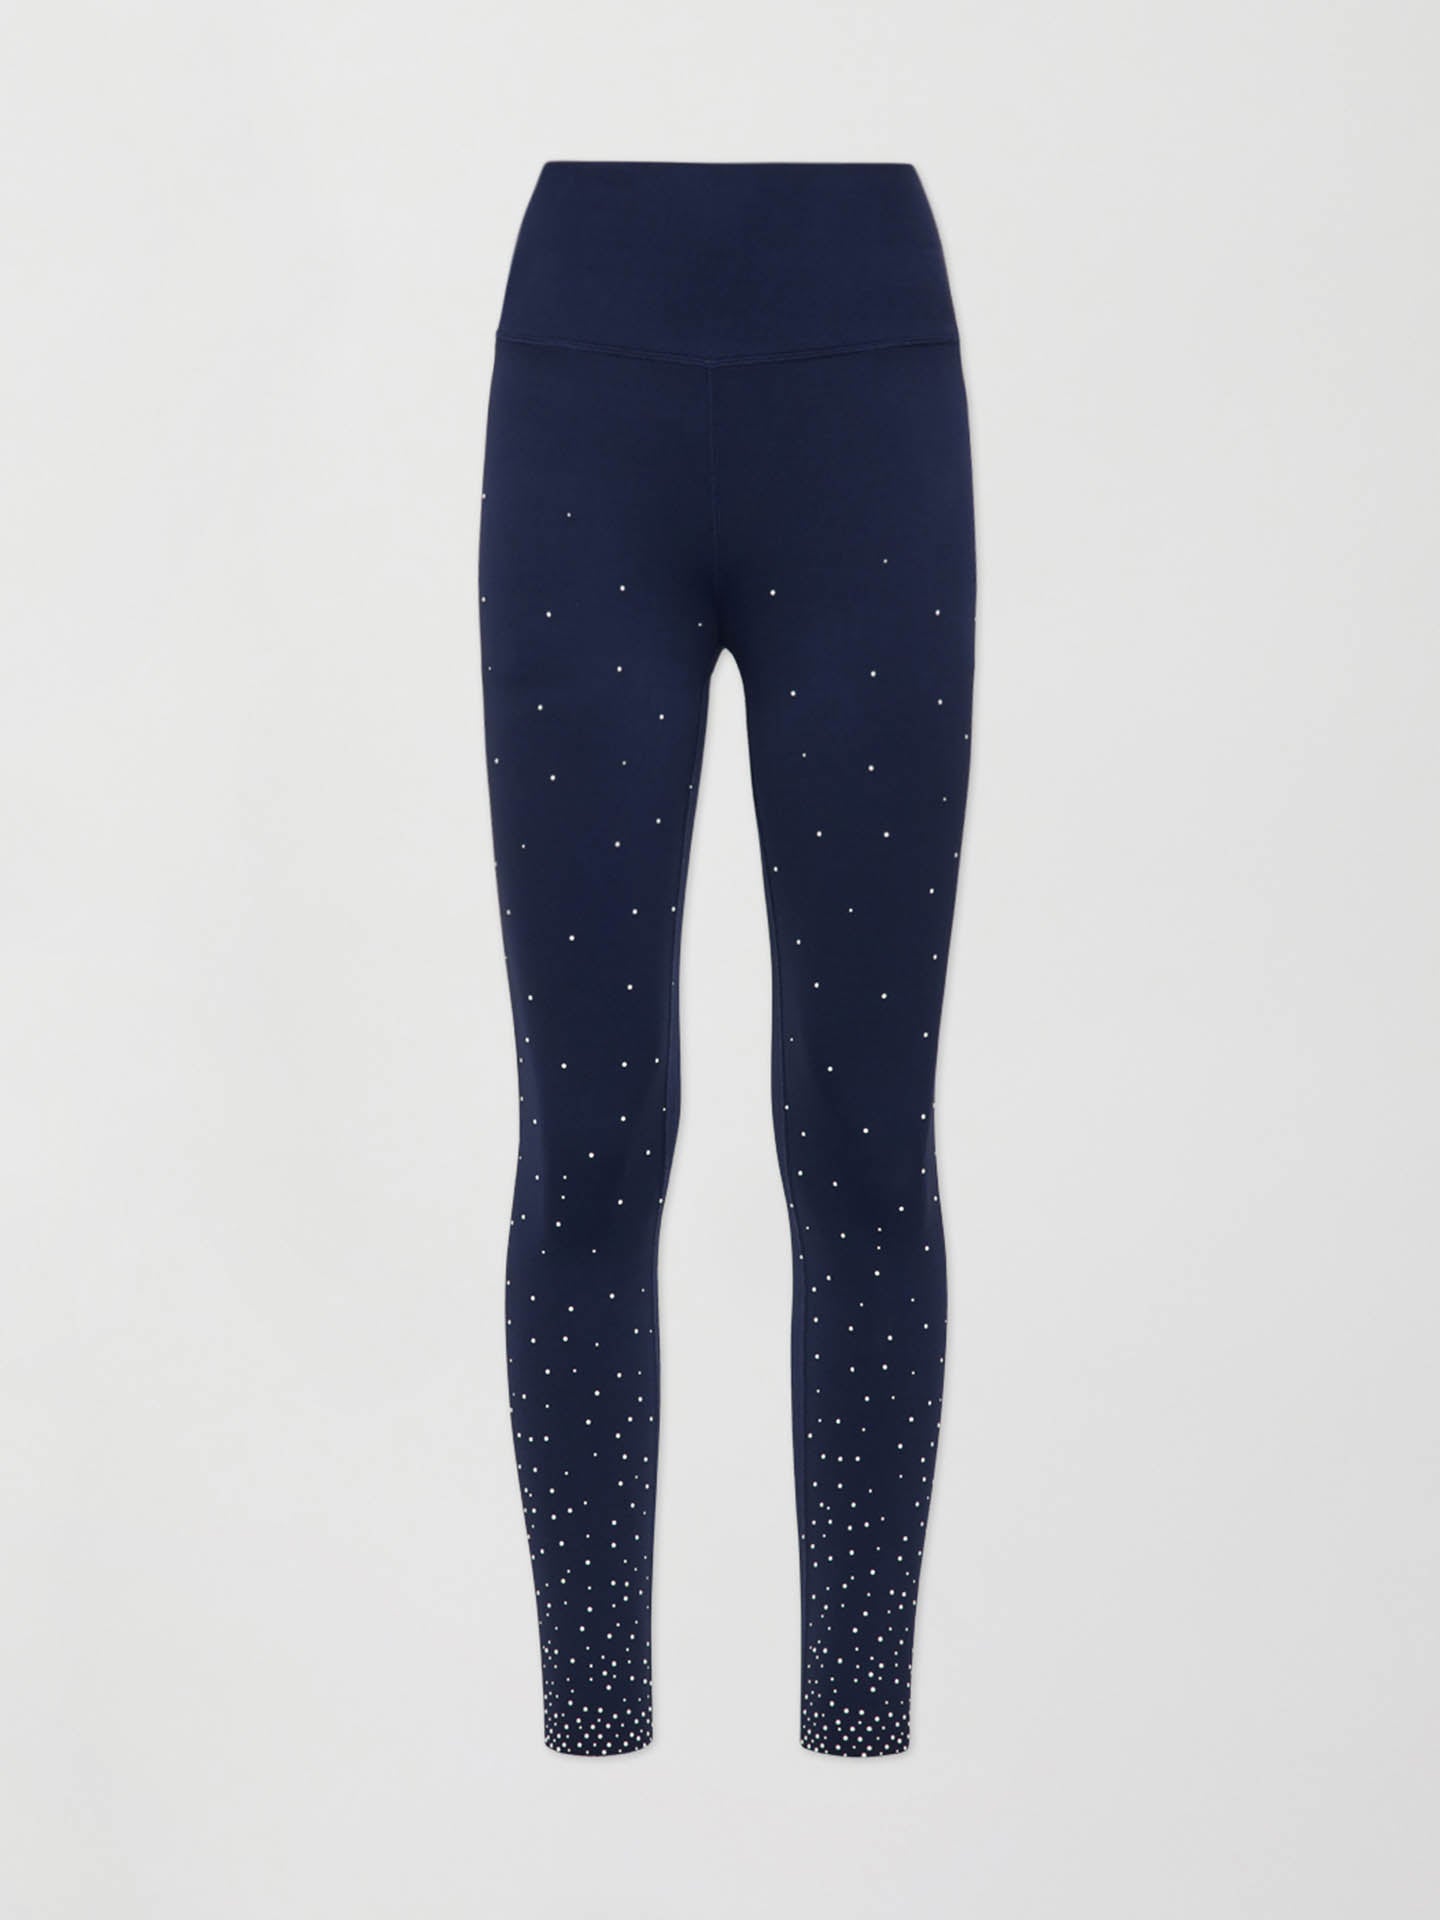 PEARL HIGH RISE FULL LENGTH LEGGING IN DIAMOND COMPRESSION - NAVY